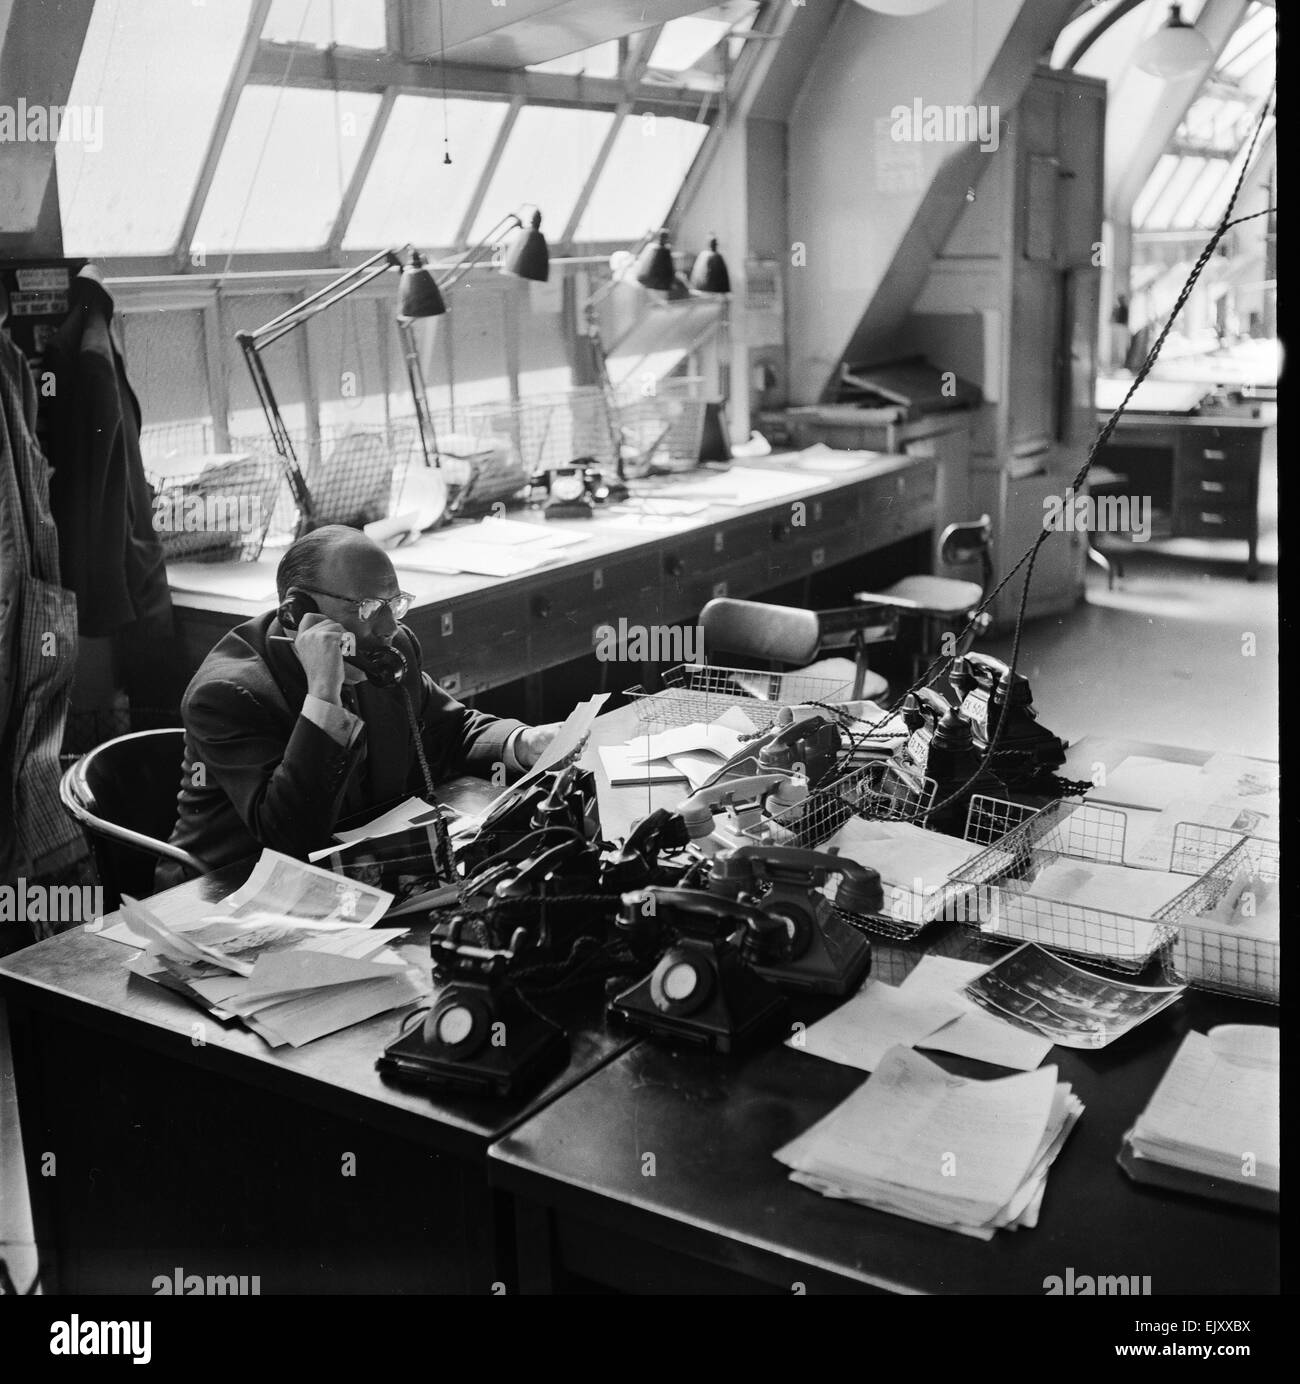 Daily Mirror Picture Desk 23rd March 1956 Stock Photo 80496750